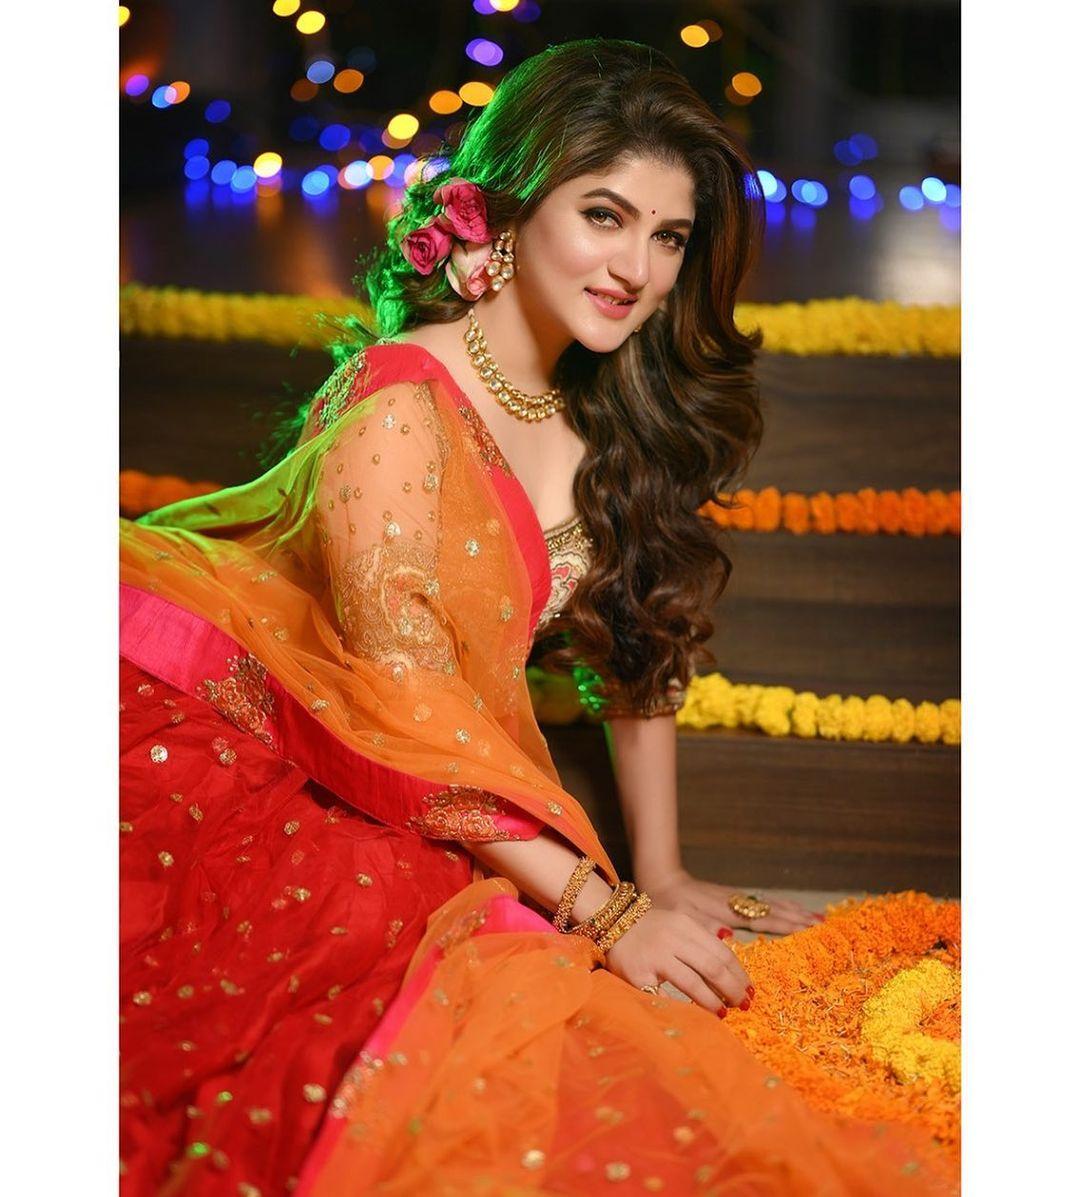 Actress Srabanti Chatterjee latest hot and young actress photos | Srabanti  Chatterjee exposing hot photos gallery Photos: HD Images, Pictures, Stills,  First Look Posters of Actress Srabanti Chatterjee latest hot and young